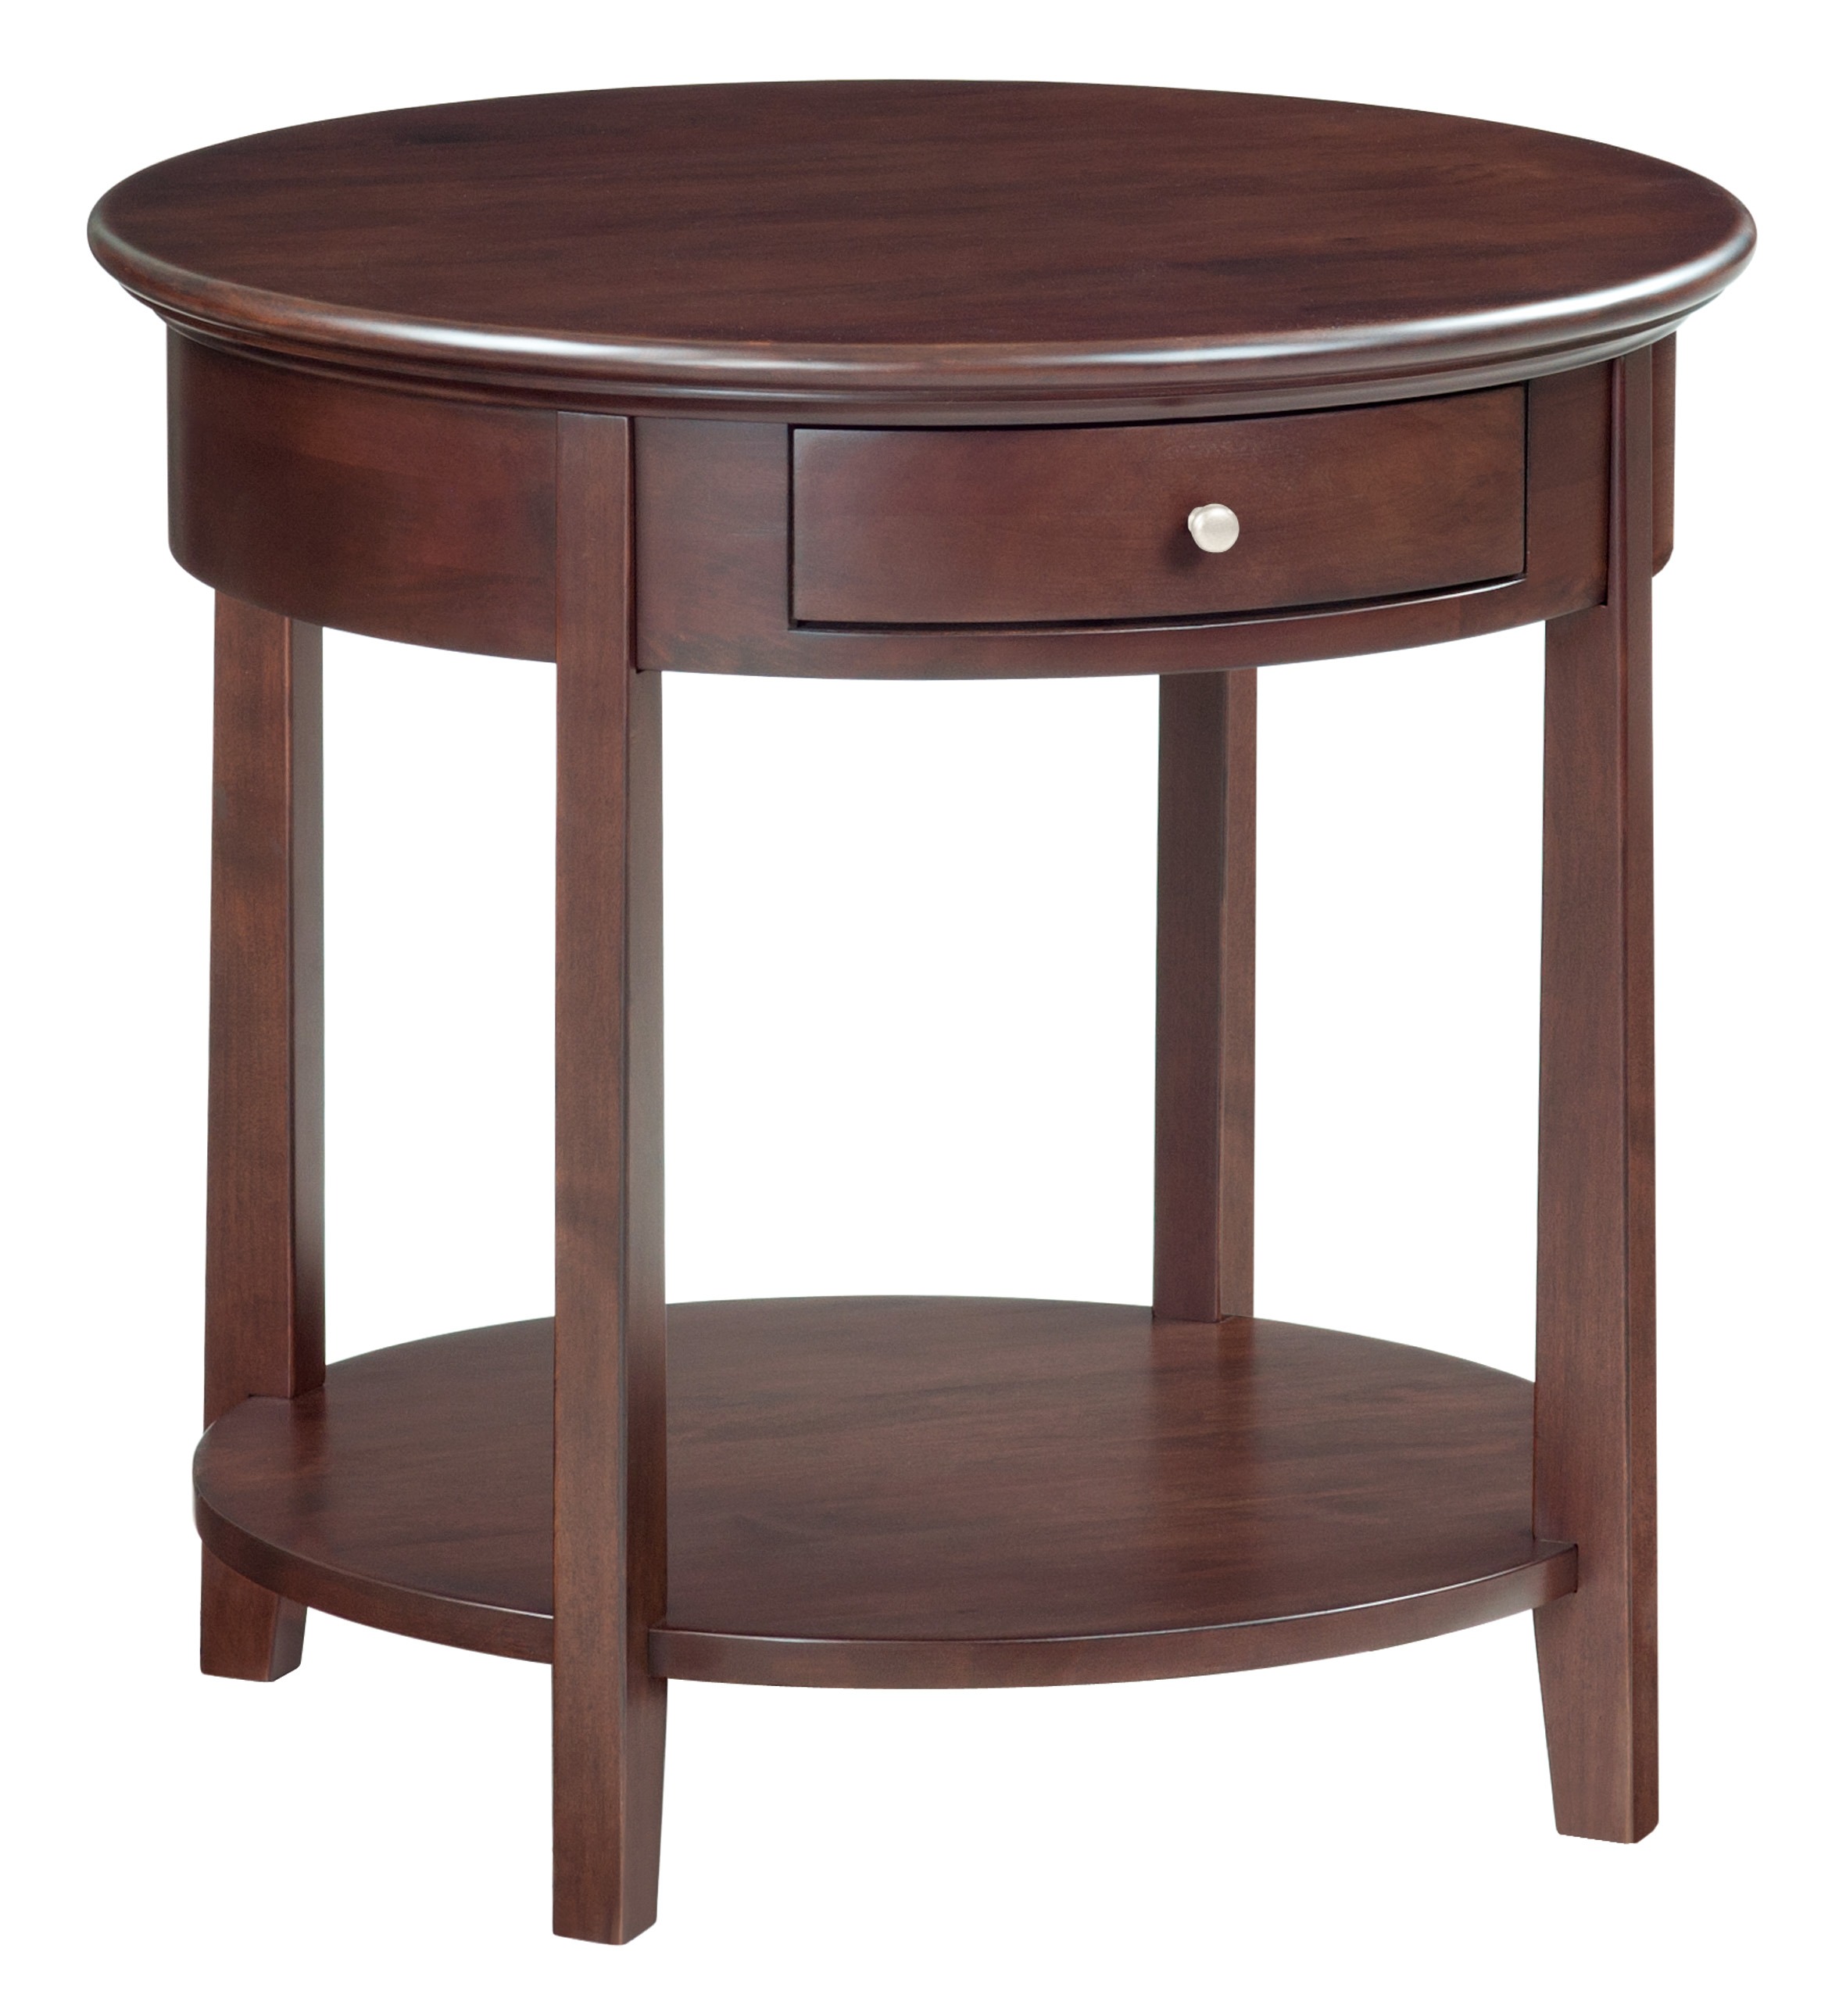 3510 Mckenzie Large Round End Table, Large Wood End Table With Drawers